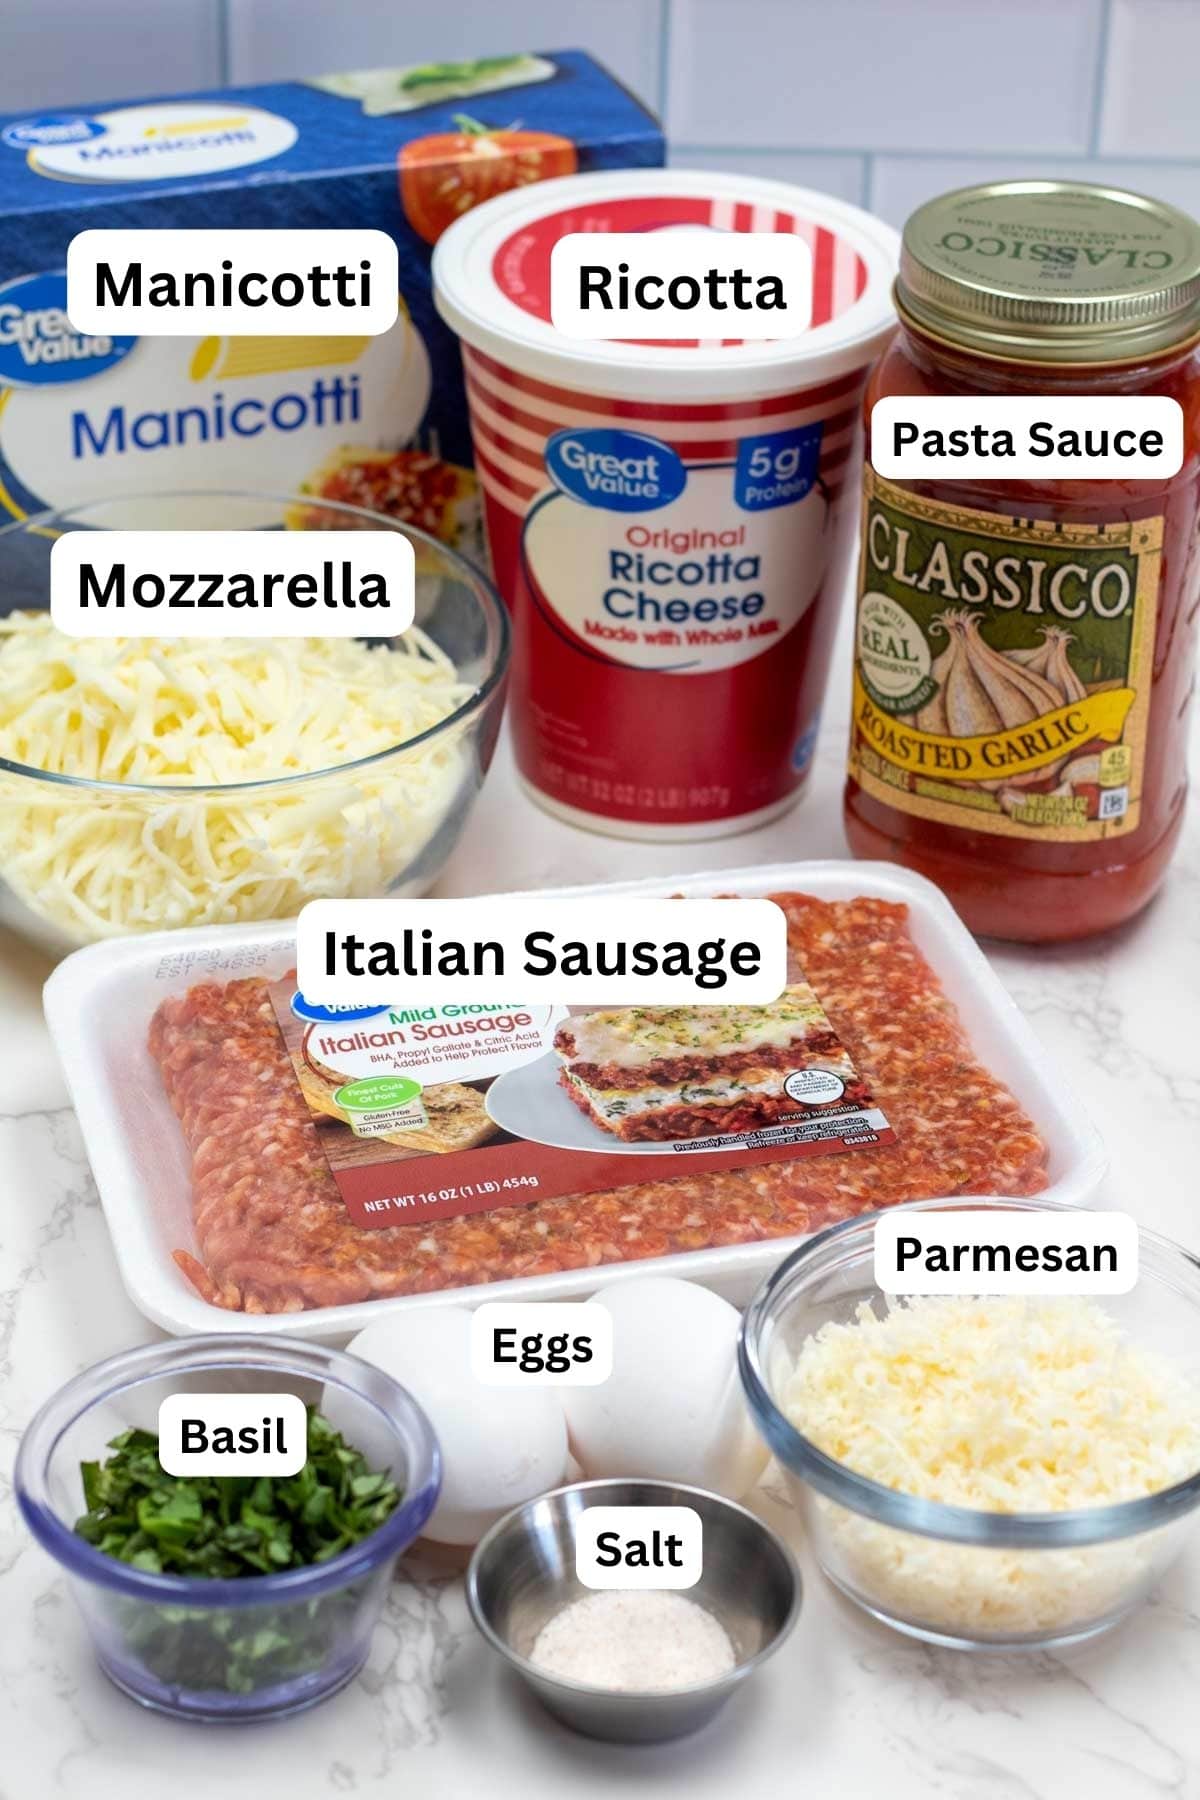 Stuffed manicotti with Italian sausage and ricotta cheese filling ingredients measured out and labeled.